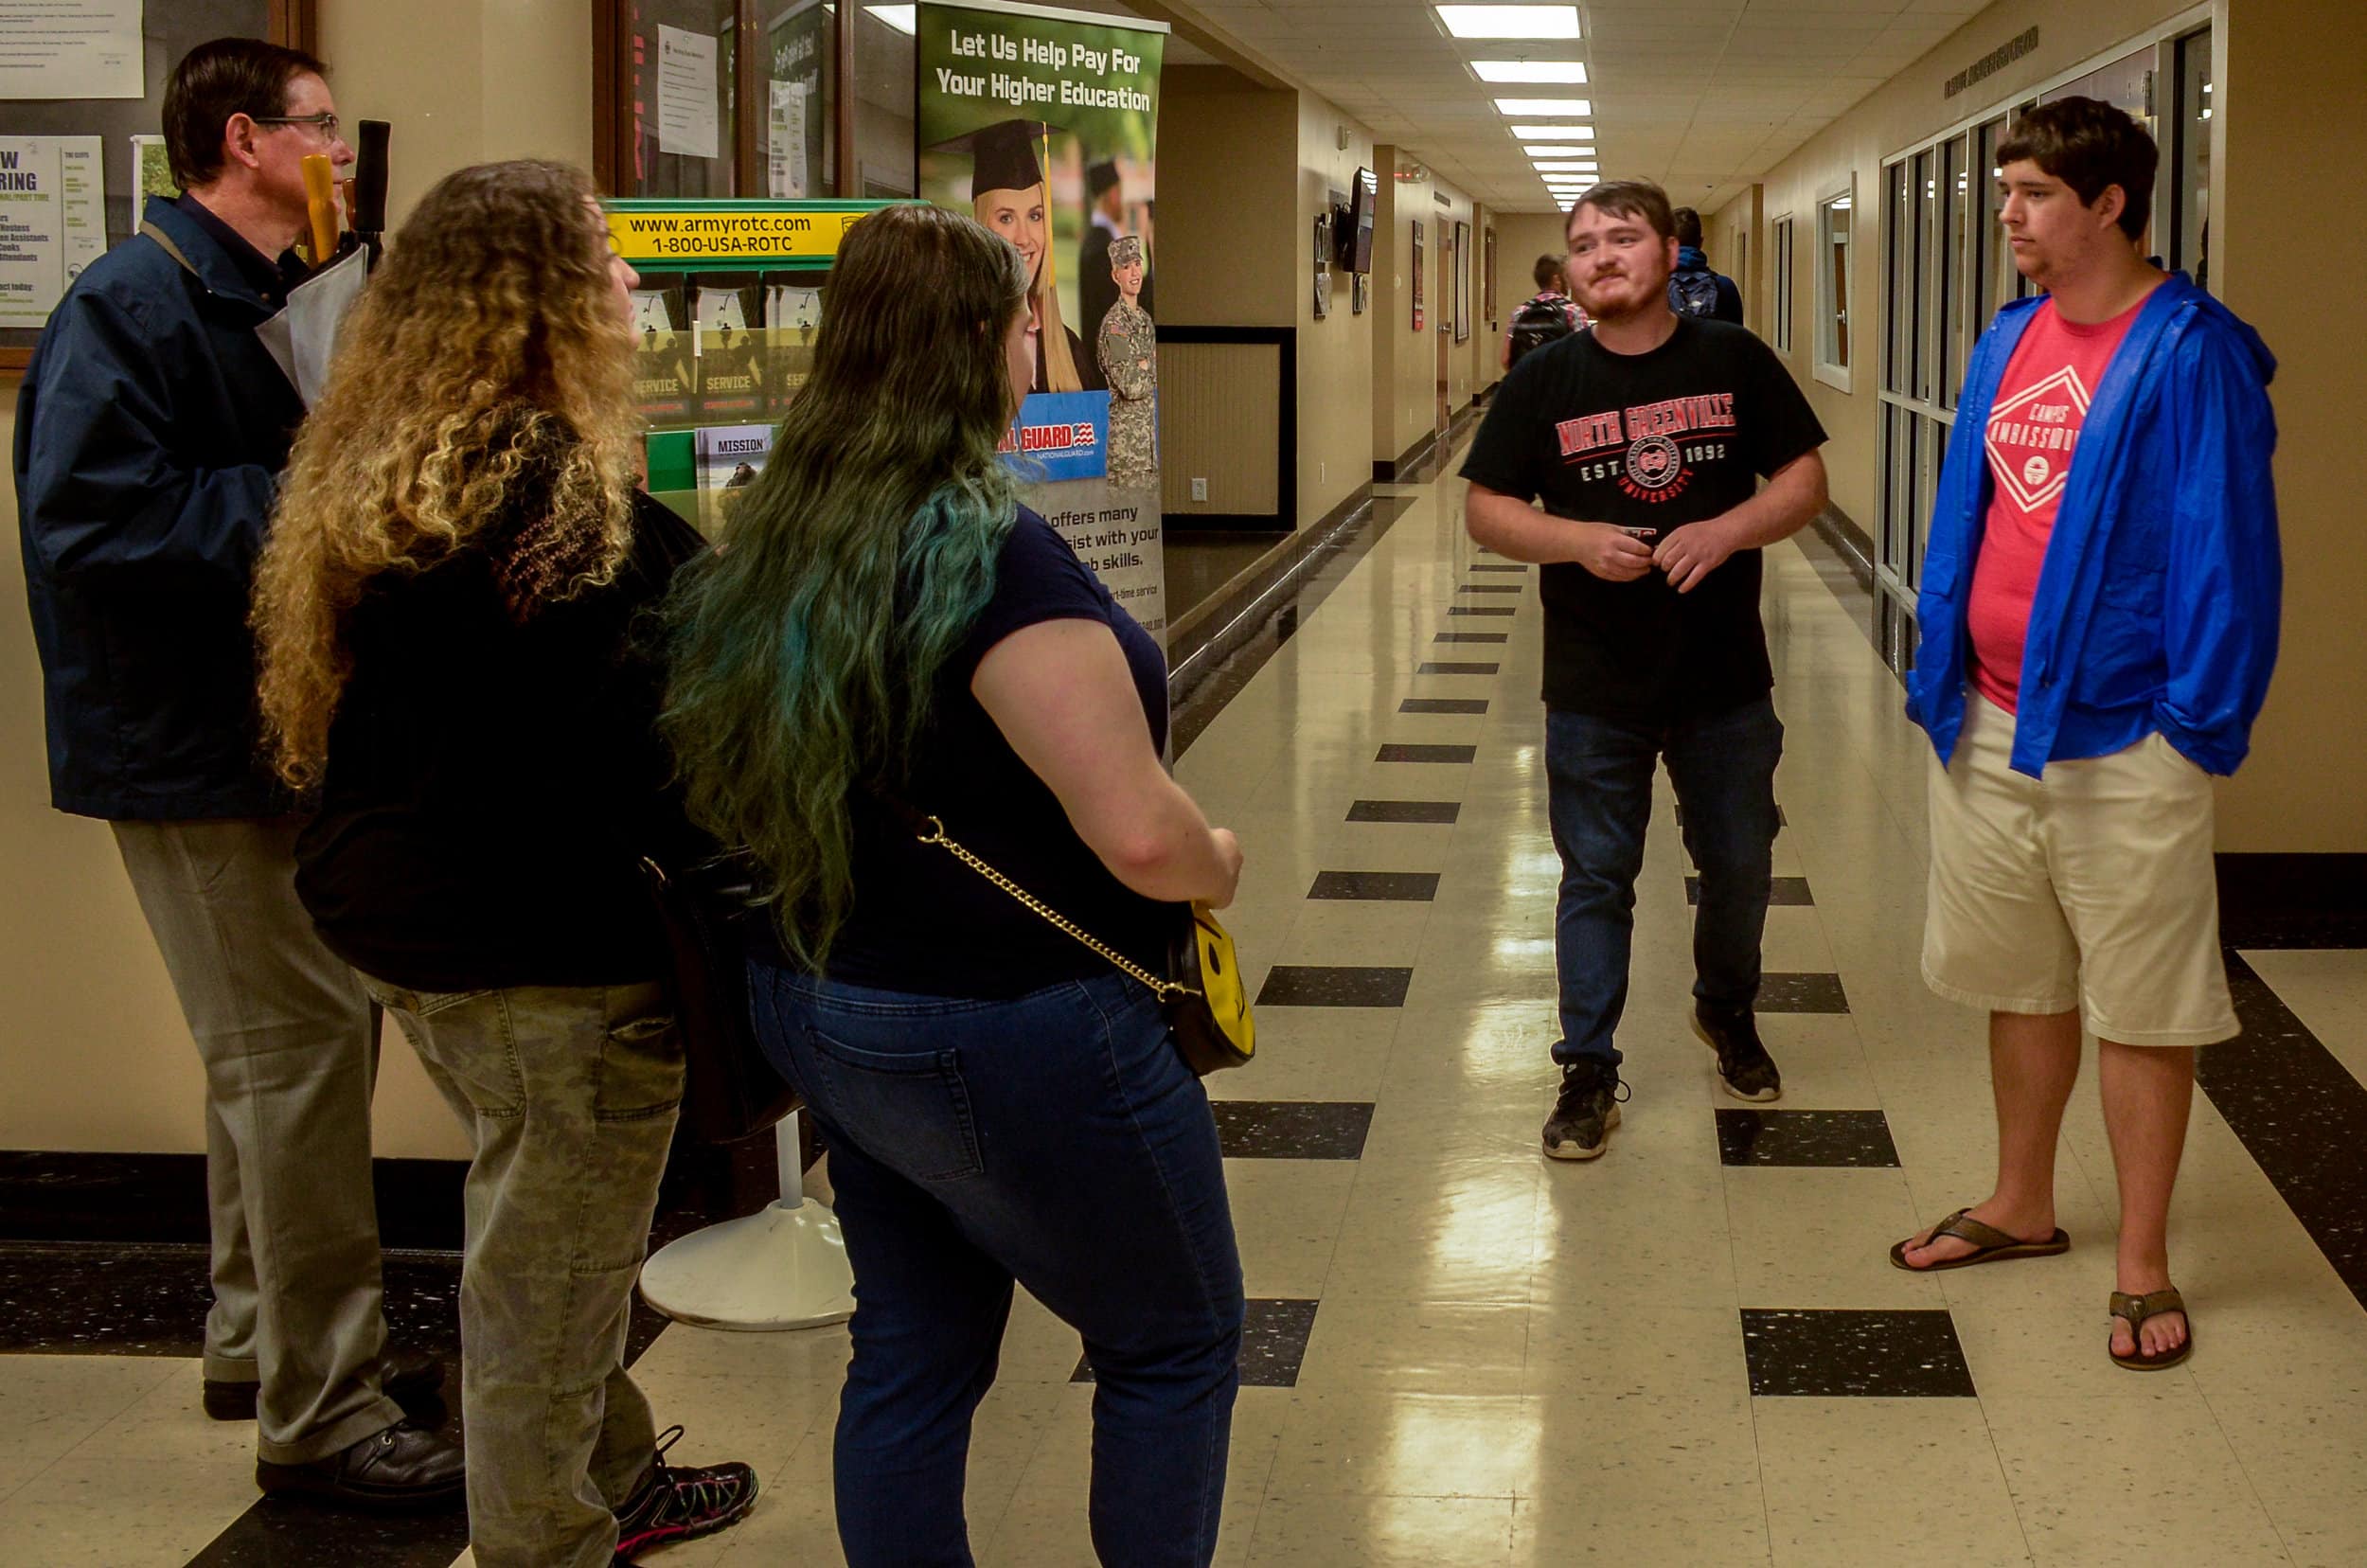 NGU students provide tours to potential Crusaders showing where students hang out, buy books and play games.